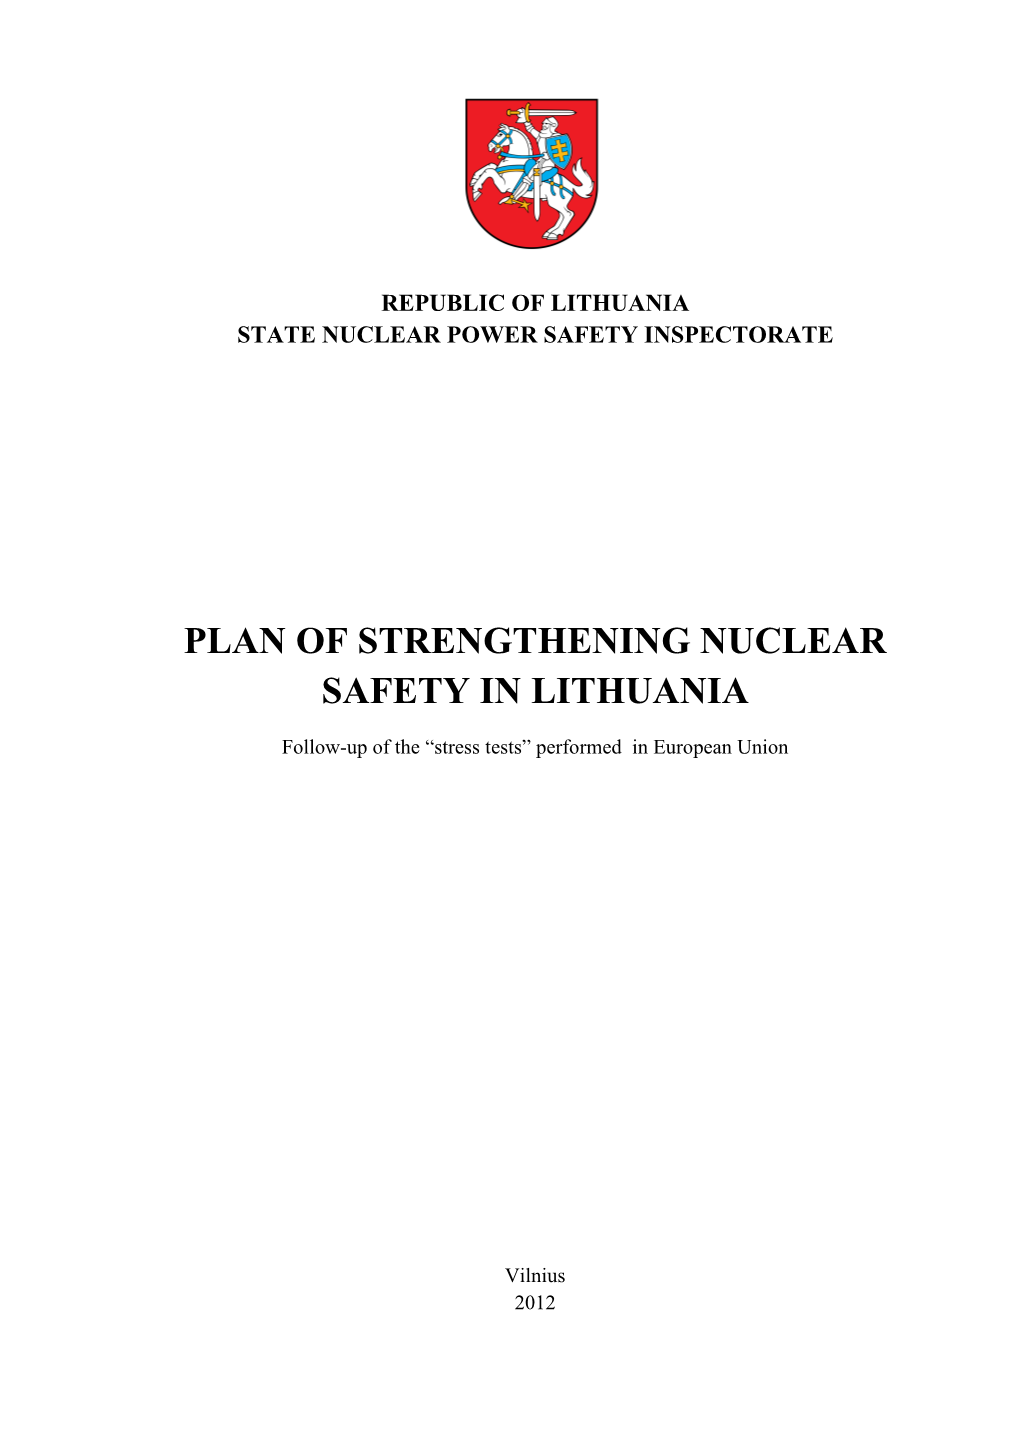 Plan of Strengthening Nuclear Safety in Lithuania